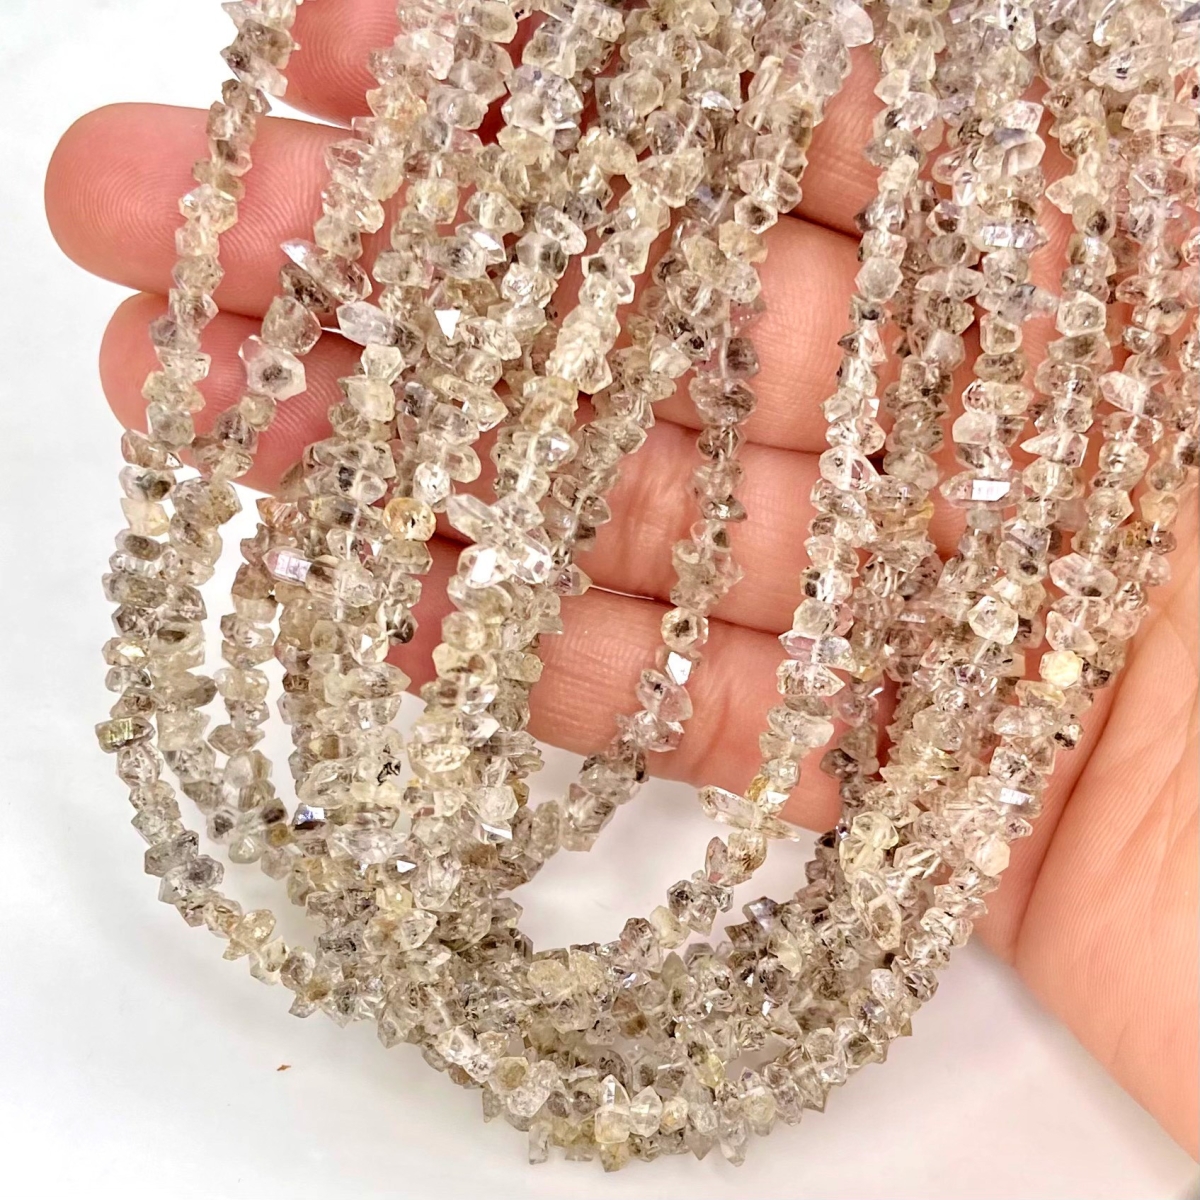 Herkimer Diamond 7.5-12mm Faceted Nugget A Grade Gemstone Beads Lot - 155137